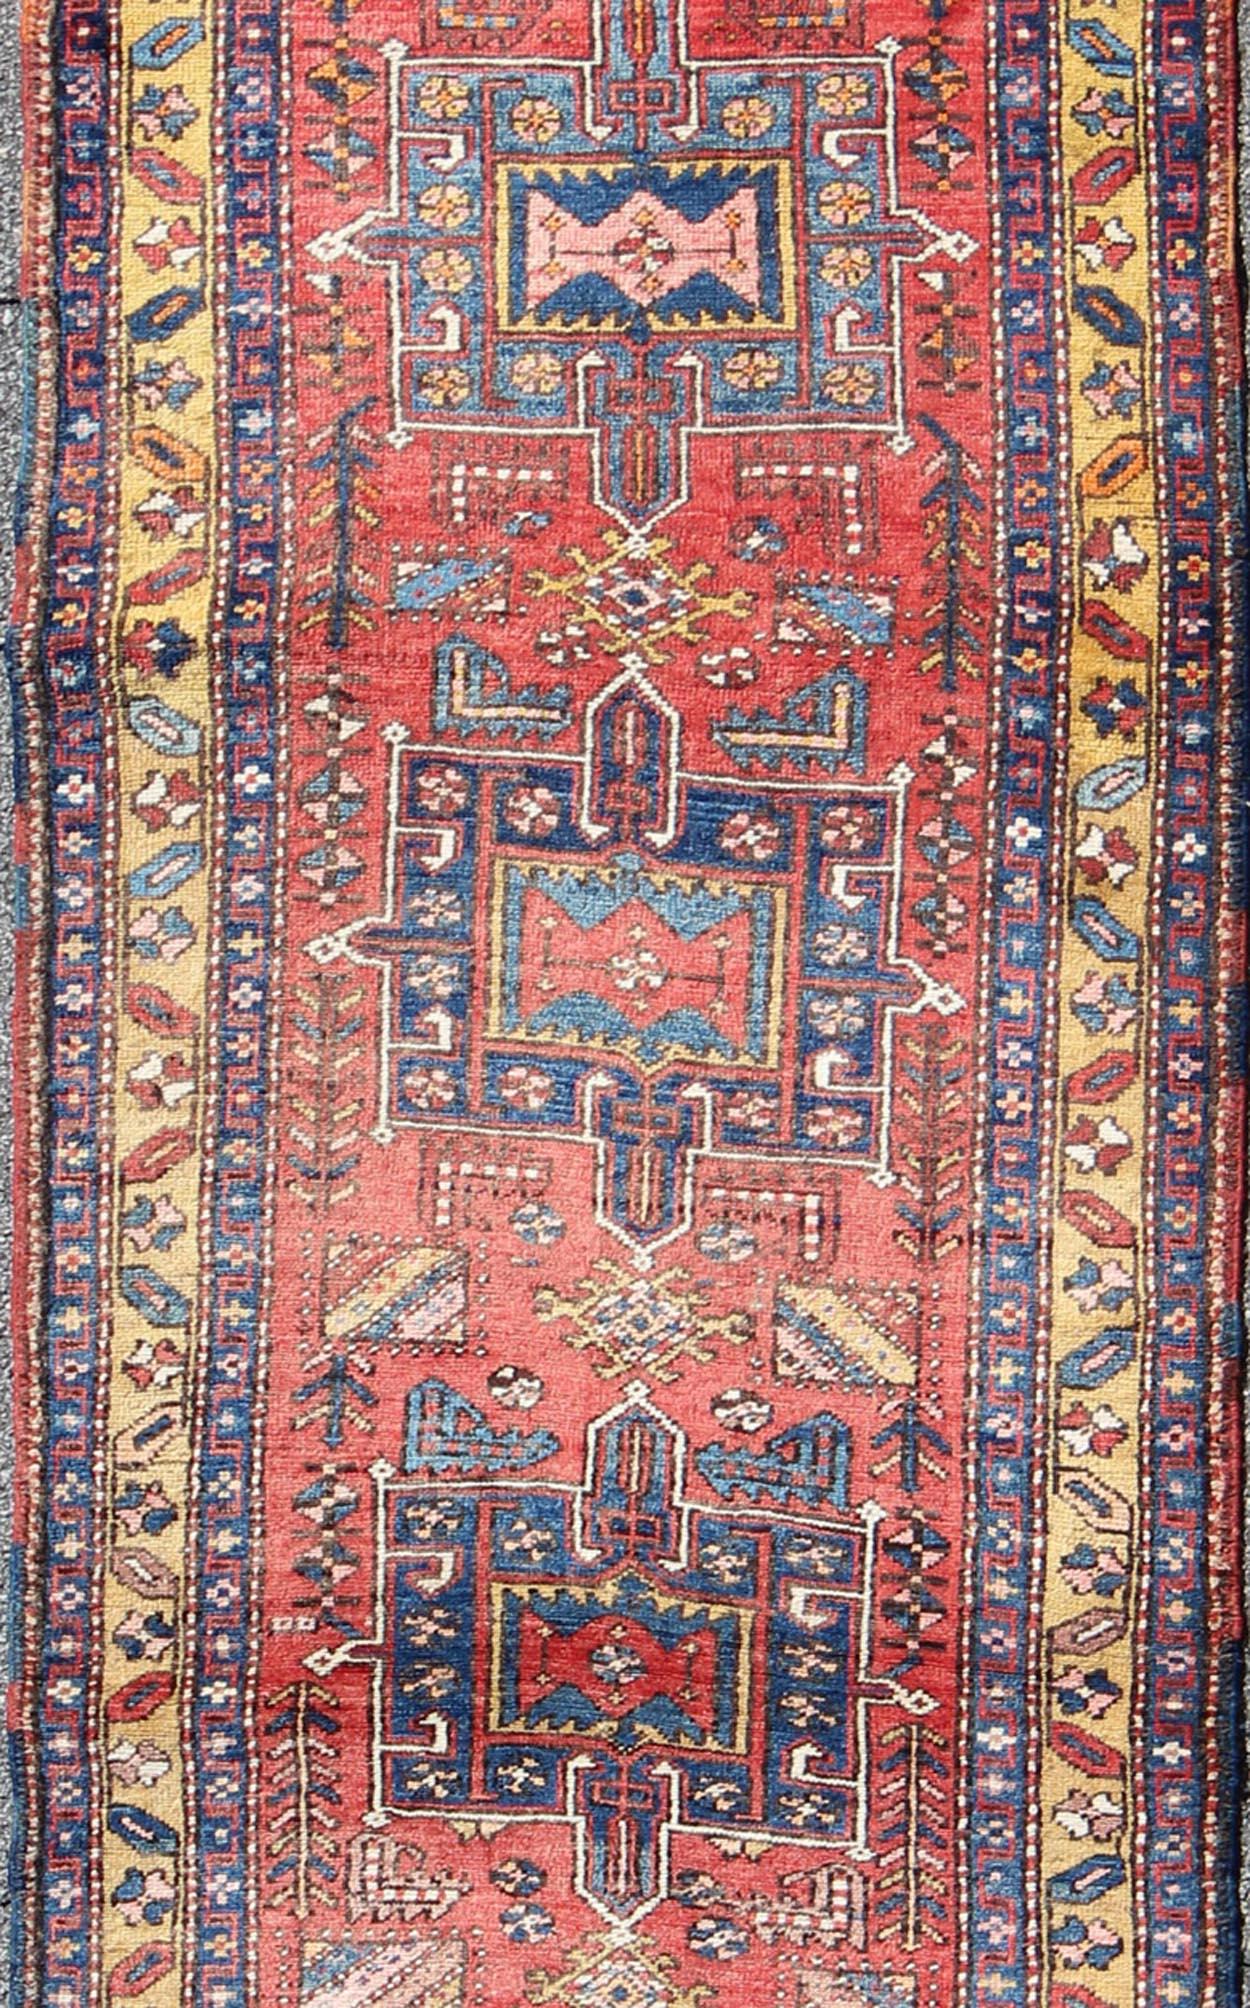 Semi antique Heriz runner rug in soft red, blue and yellow colors, rug/KB-SP-2127 . This Semi antique Heriz runner features a geometric medallion design rendered in red, blue, and yellow tones. 

Measures: 3'6 x 11.